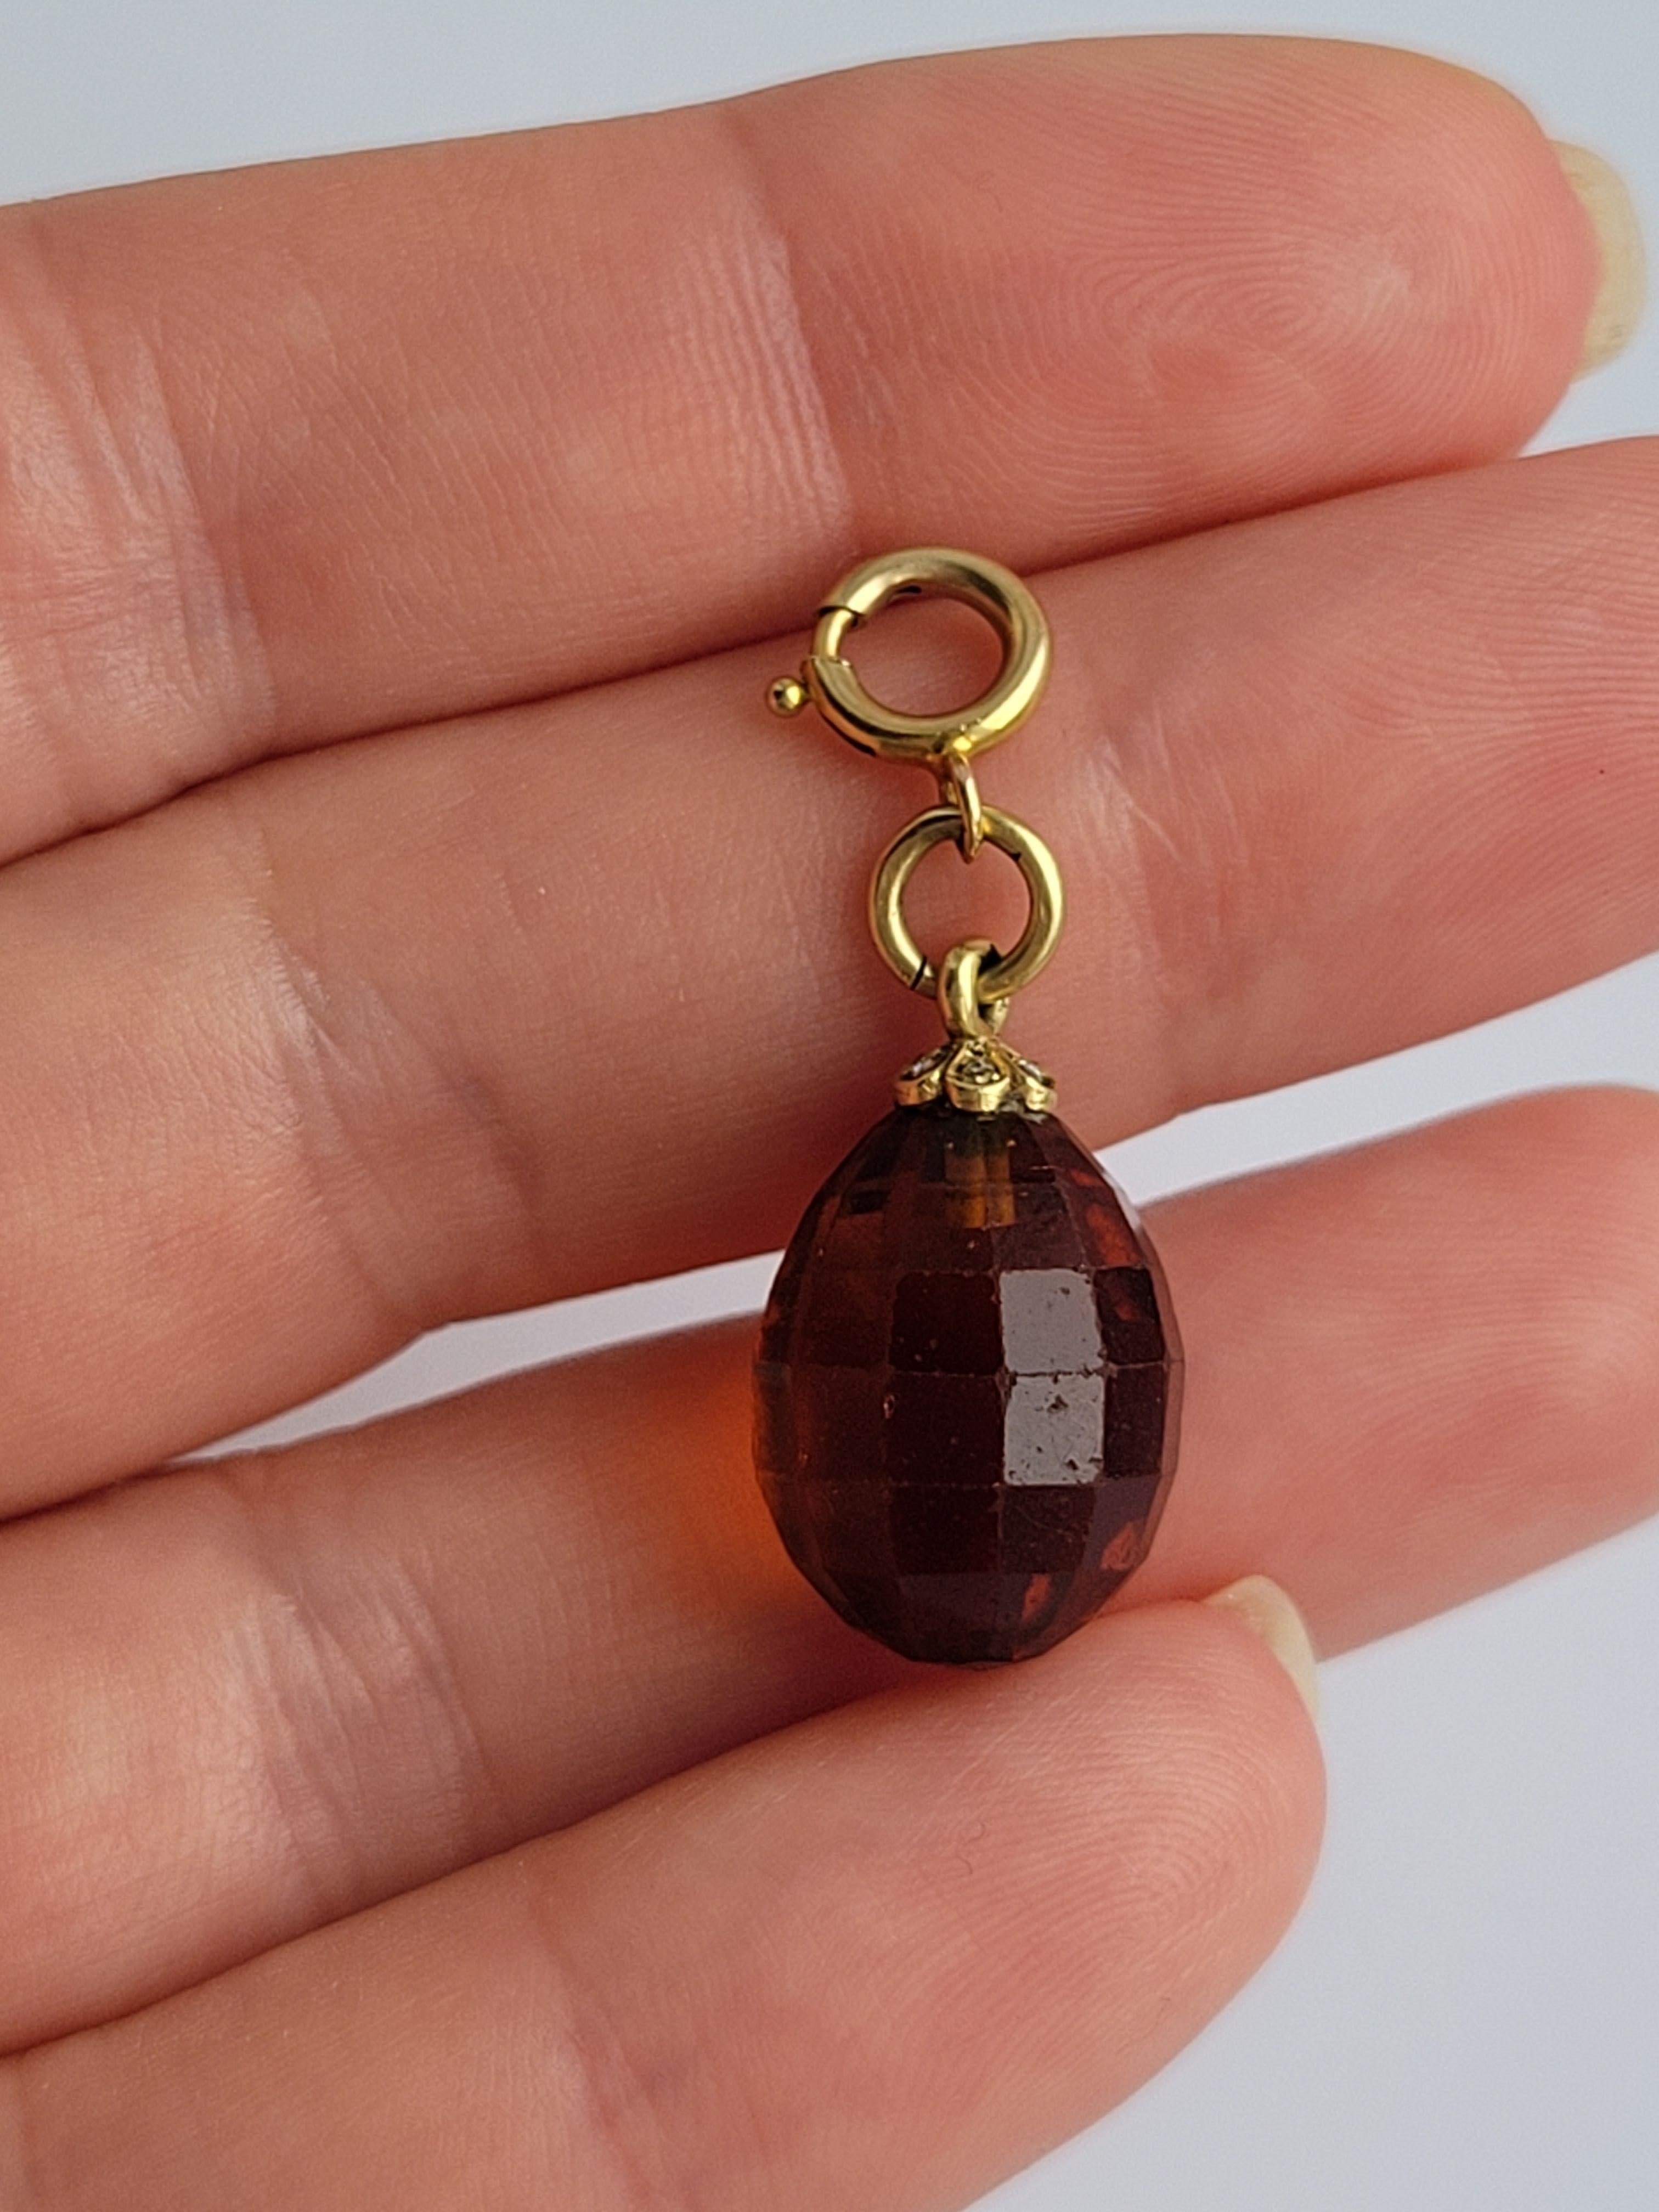 A beautiful Art Deco c.1920s Bead cut Smoky Quartz and Rose Cut Diamond pendant / Charm. The pendant complete with later 9 Carat Gold Bolt ring. Continental origin.
Total drop including bolt ring 30mm, width 10mm.
Bolt ring marked for 9 Carat